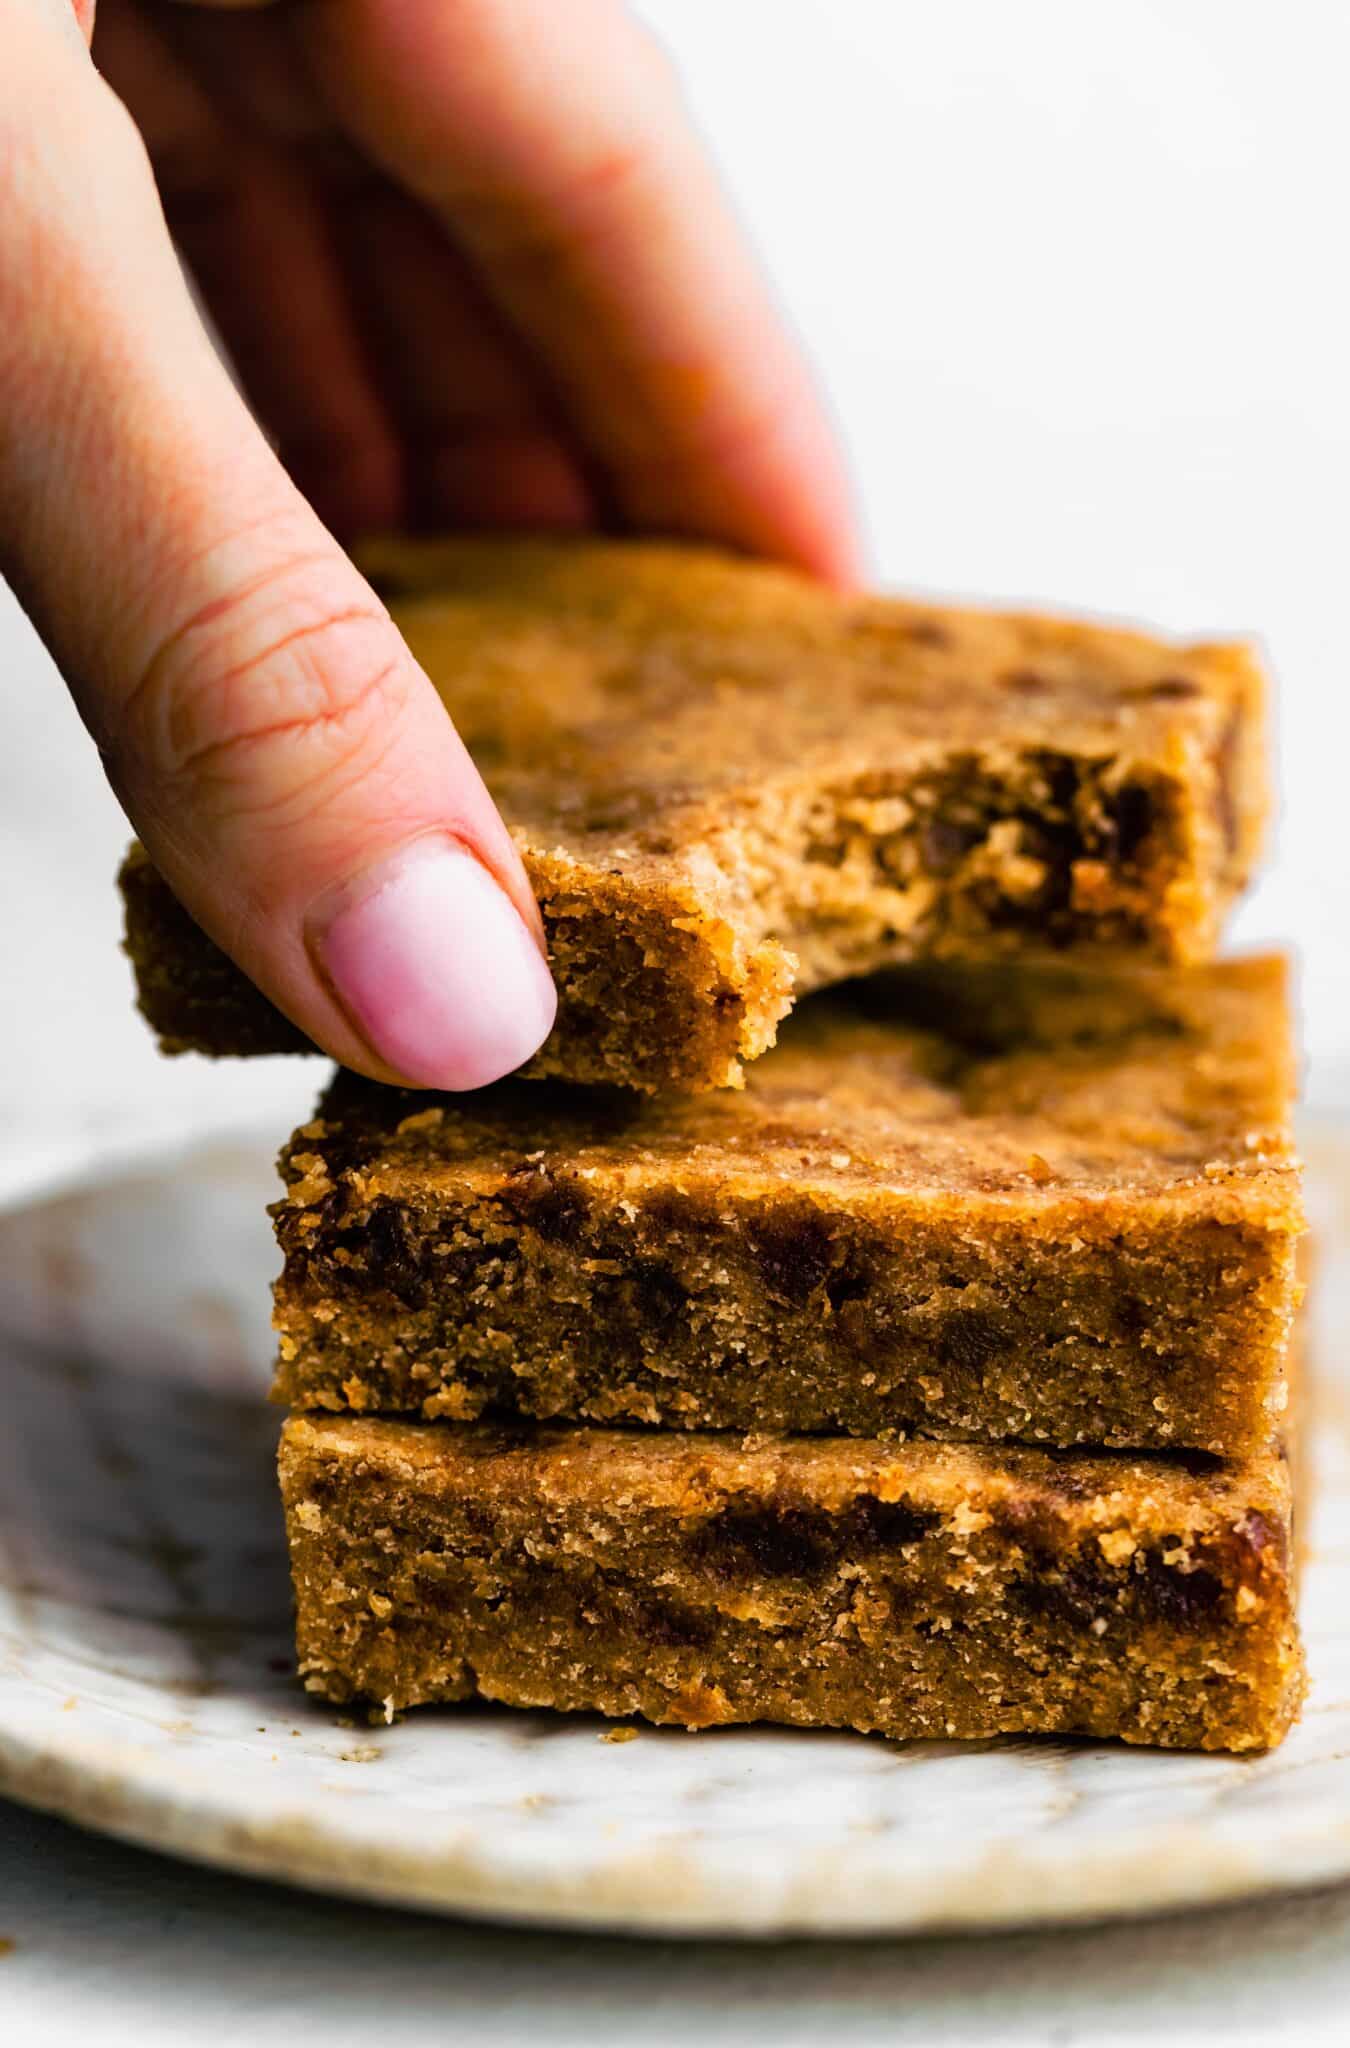 A woman's hand reaching for a stack of soft baked paleo bars on a plate.